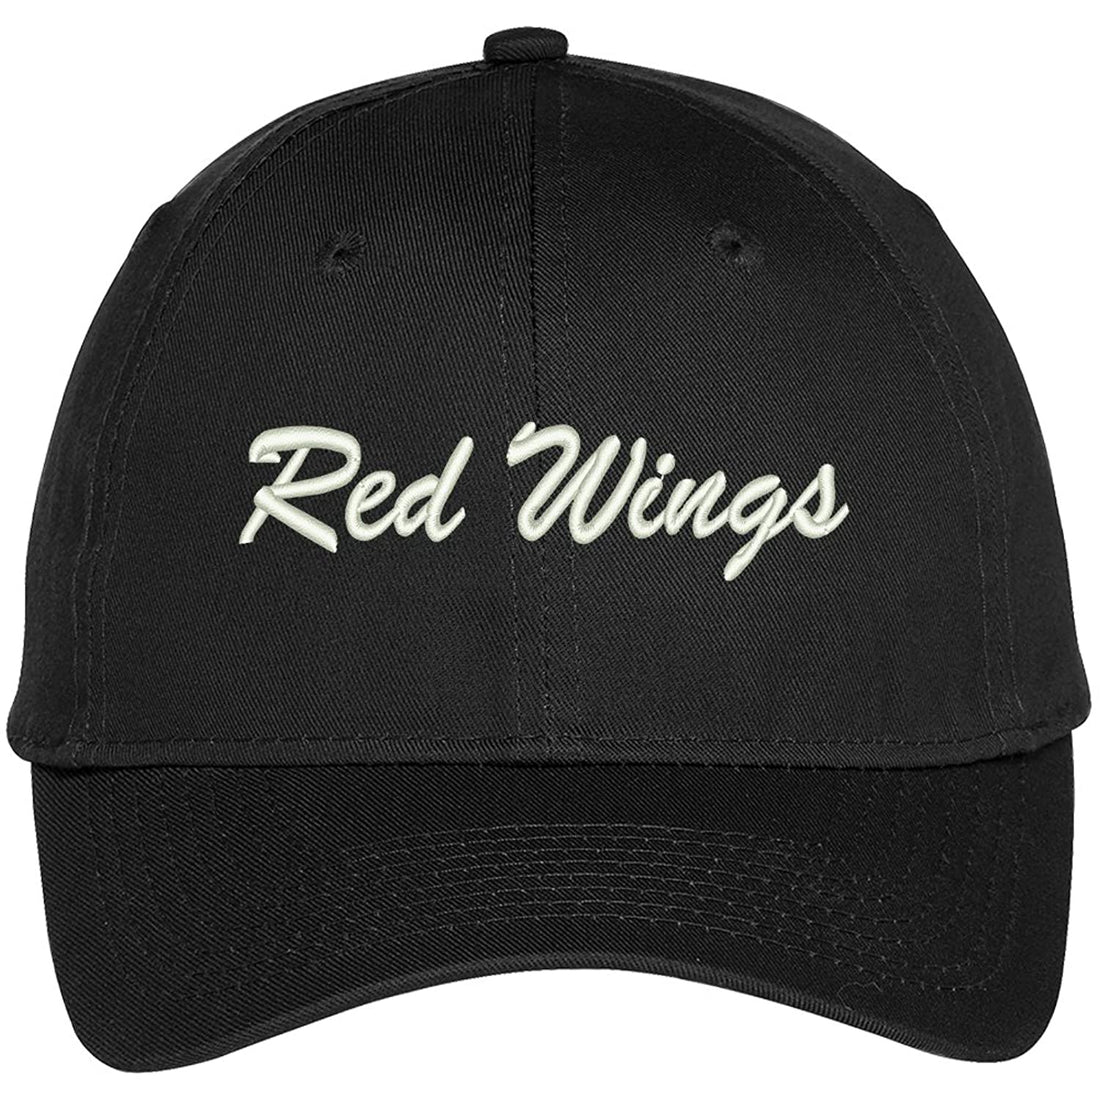 Trendy Apparel Shop Red Wings Embroidered Precurved Adjustable Cap Khaki